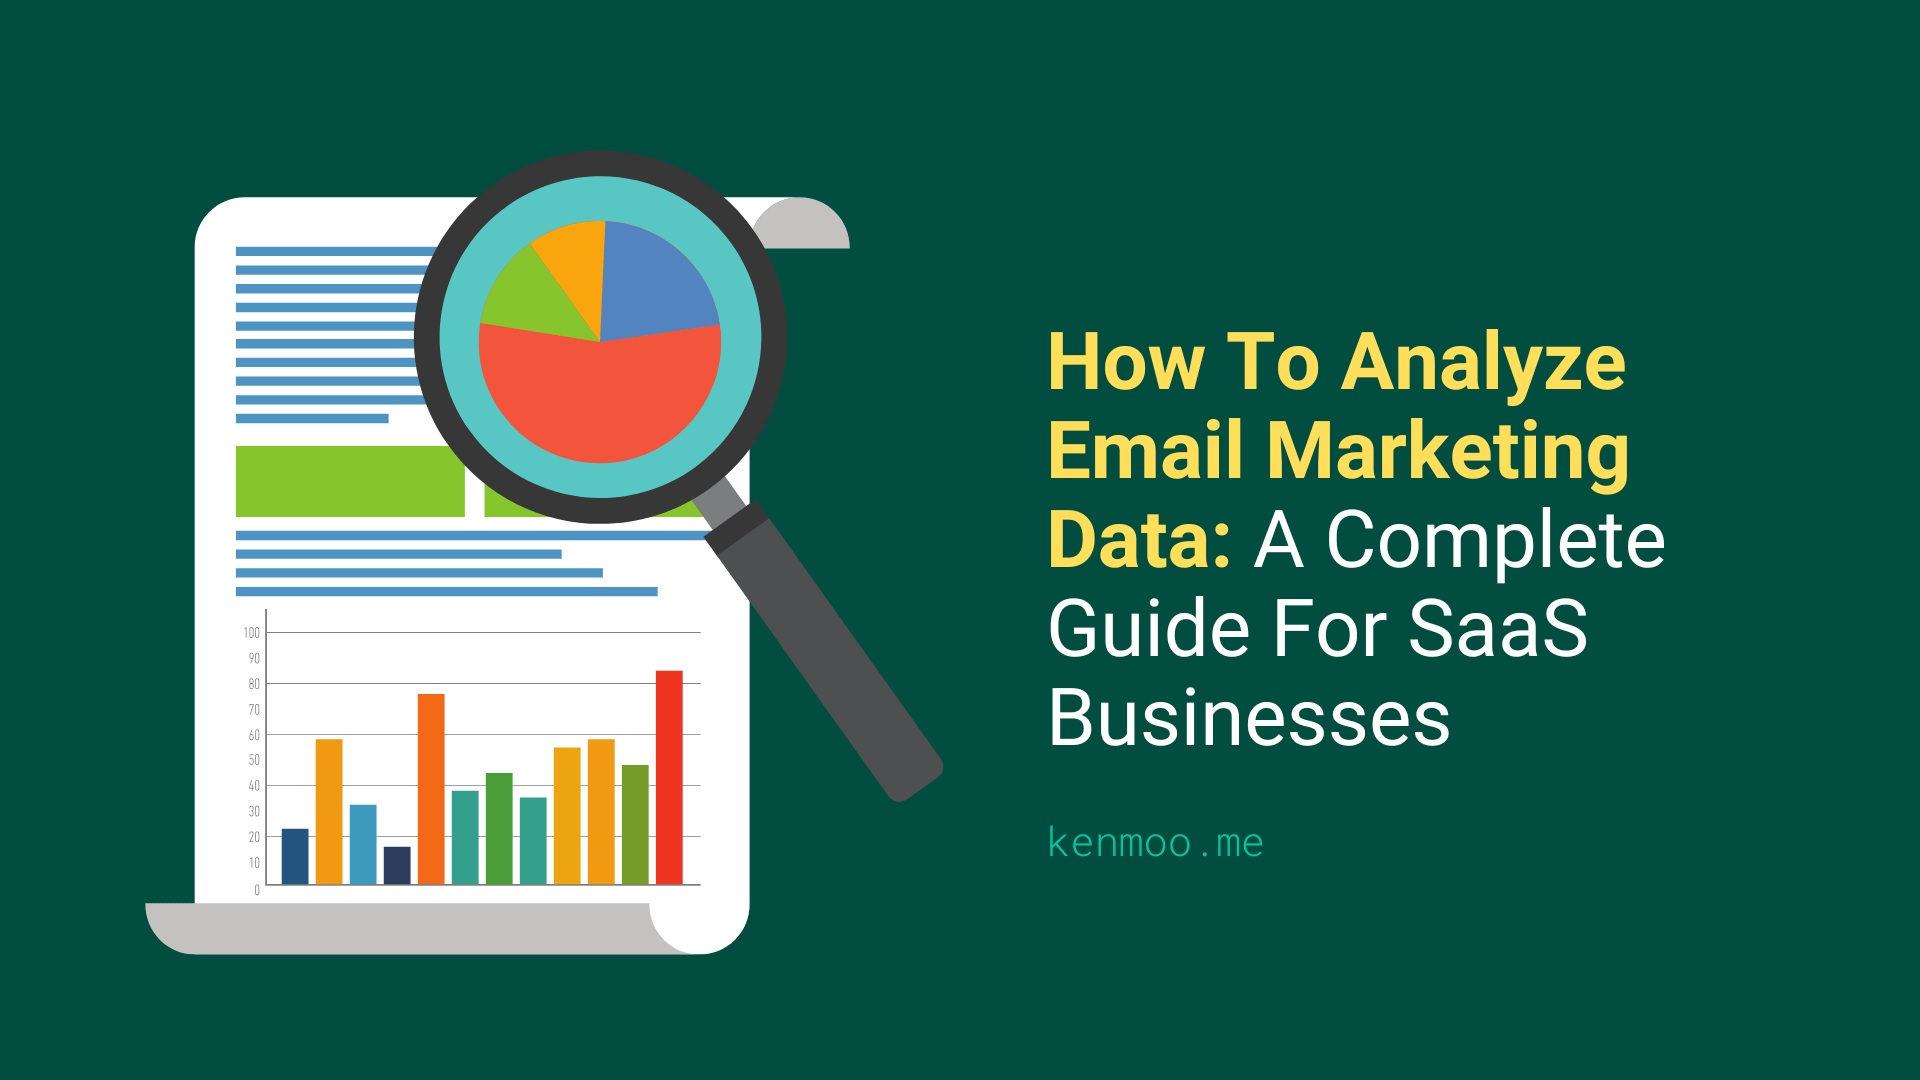 How To Analyze Email Marketing Data: A Complete Guide For SaaS Businesses